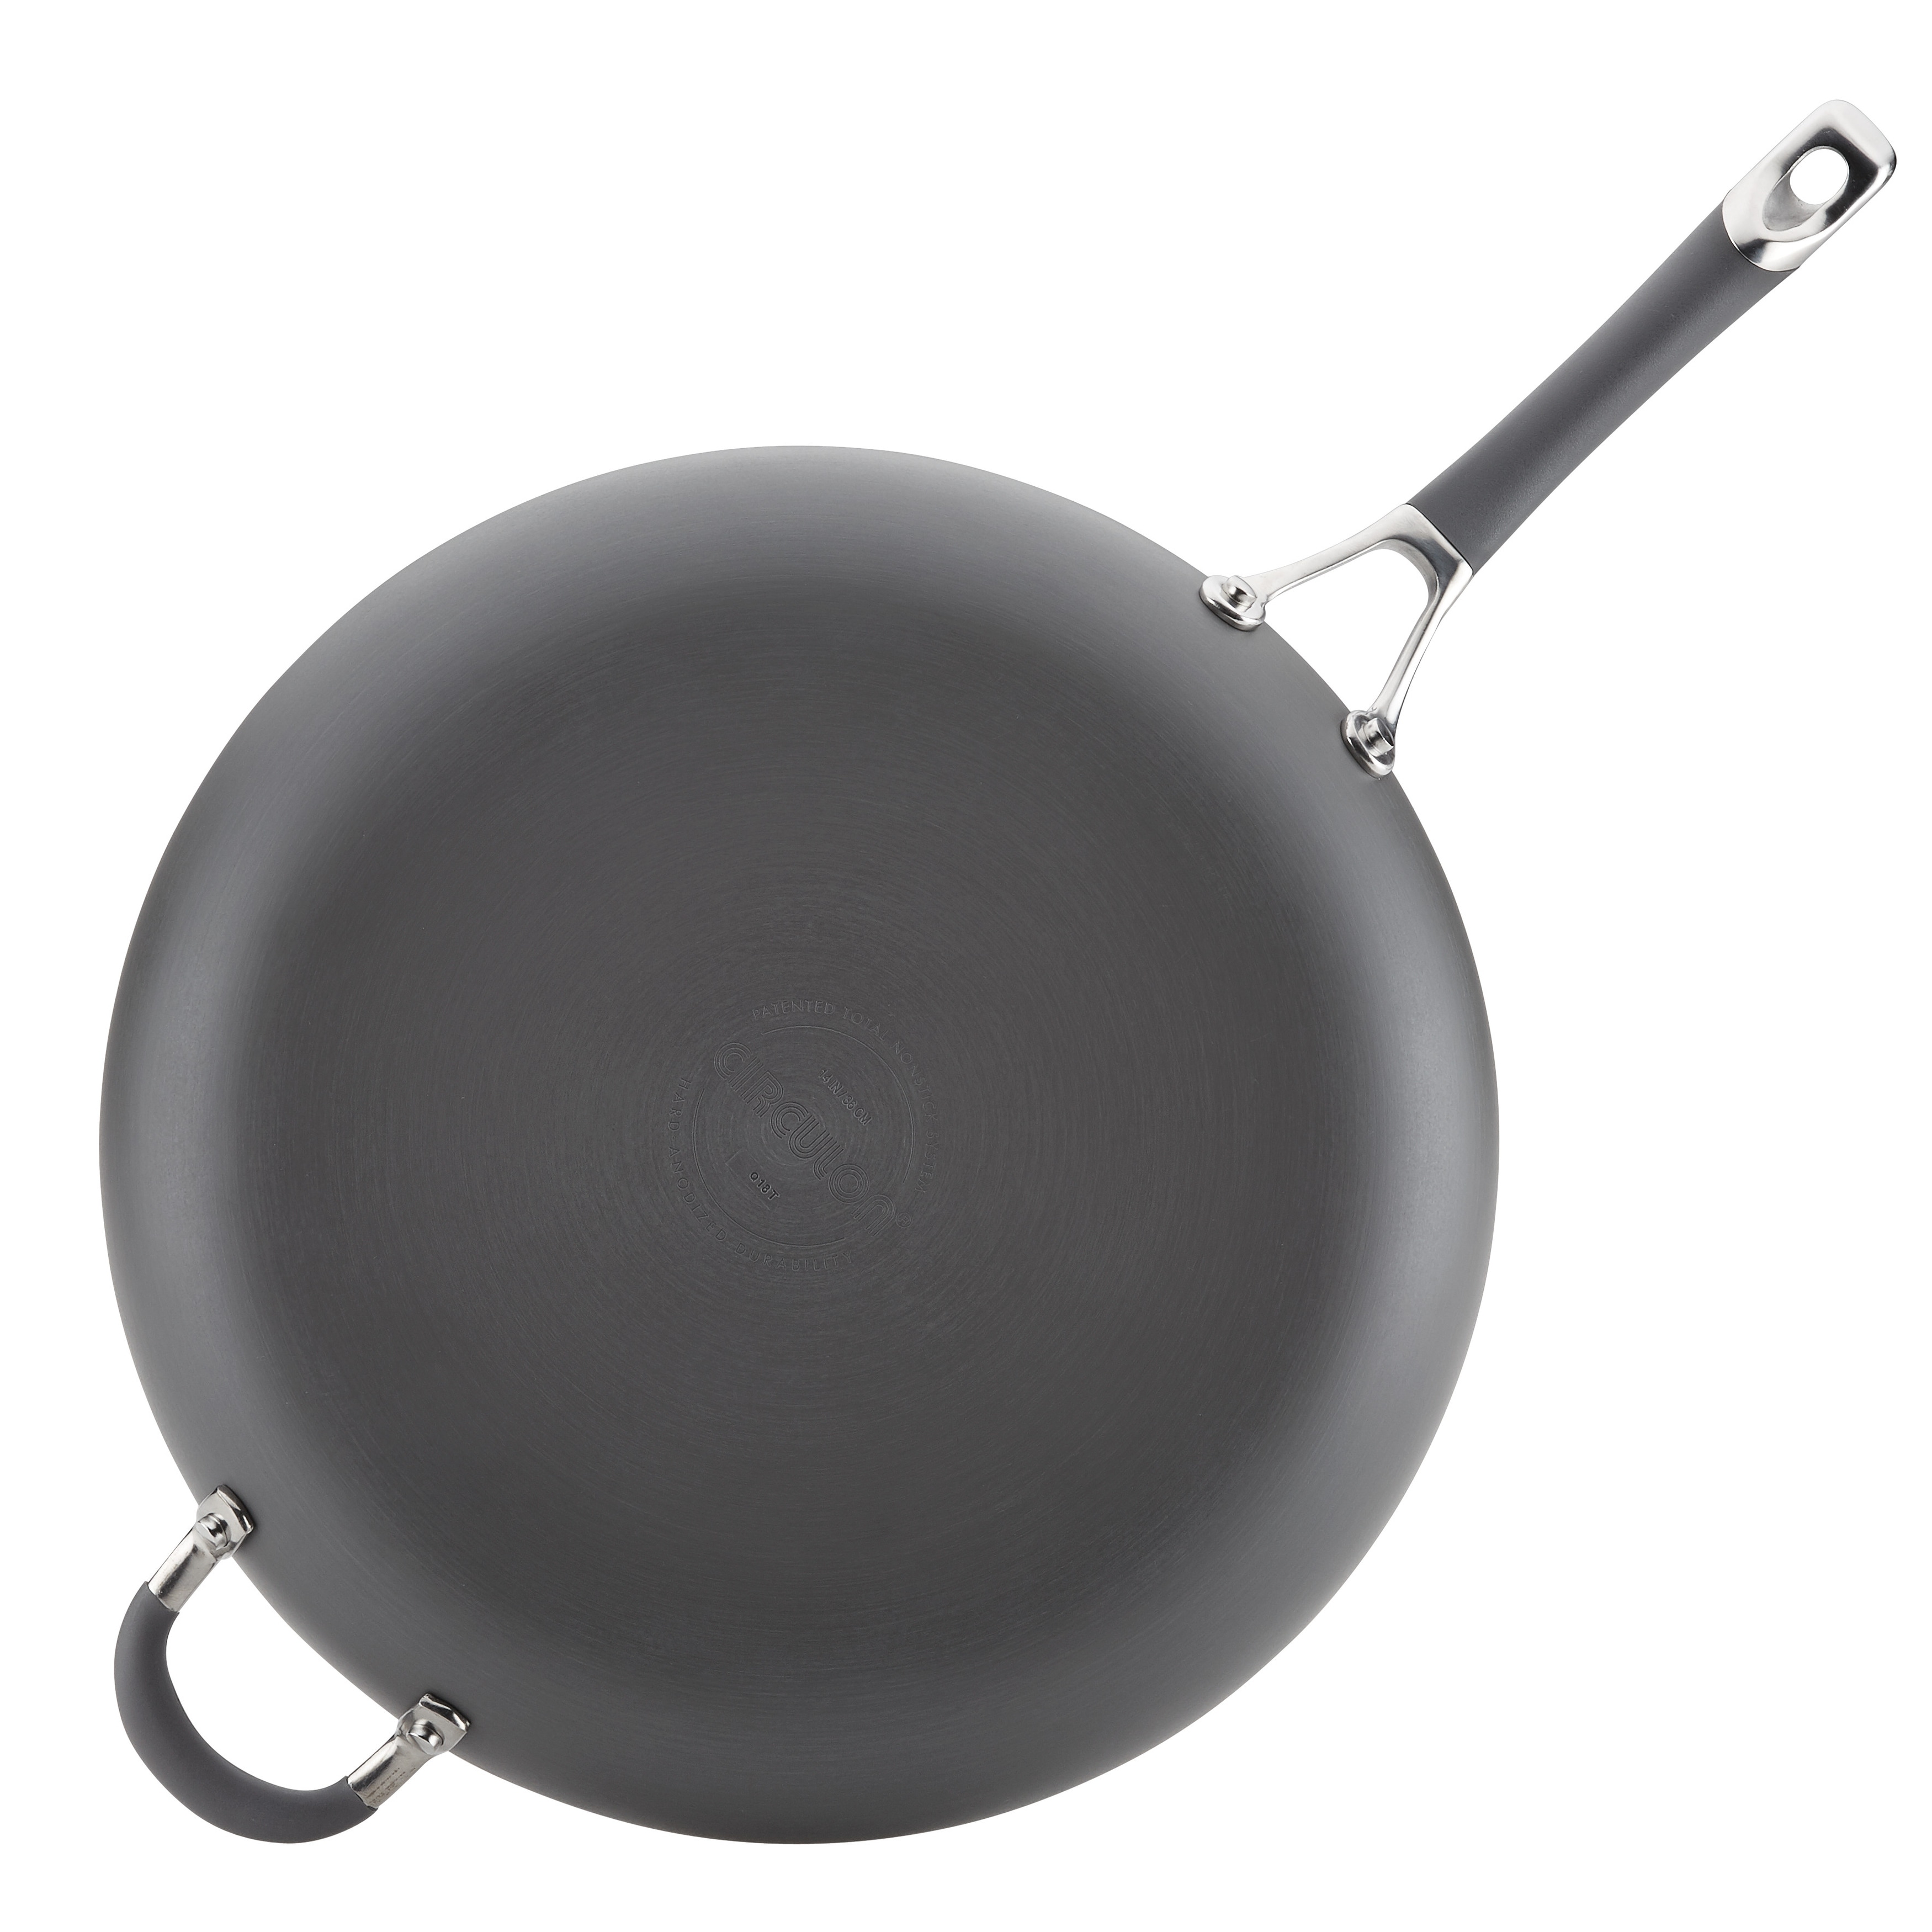 Circulon Radiance Hard Anodized Nonstick Frying Pan with Helper Handle,  14-Inch, Gray Bed Bath  Beyond 26451088